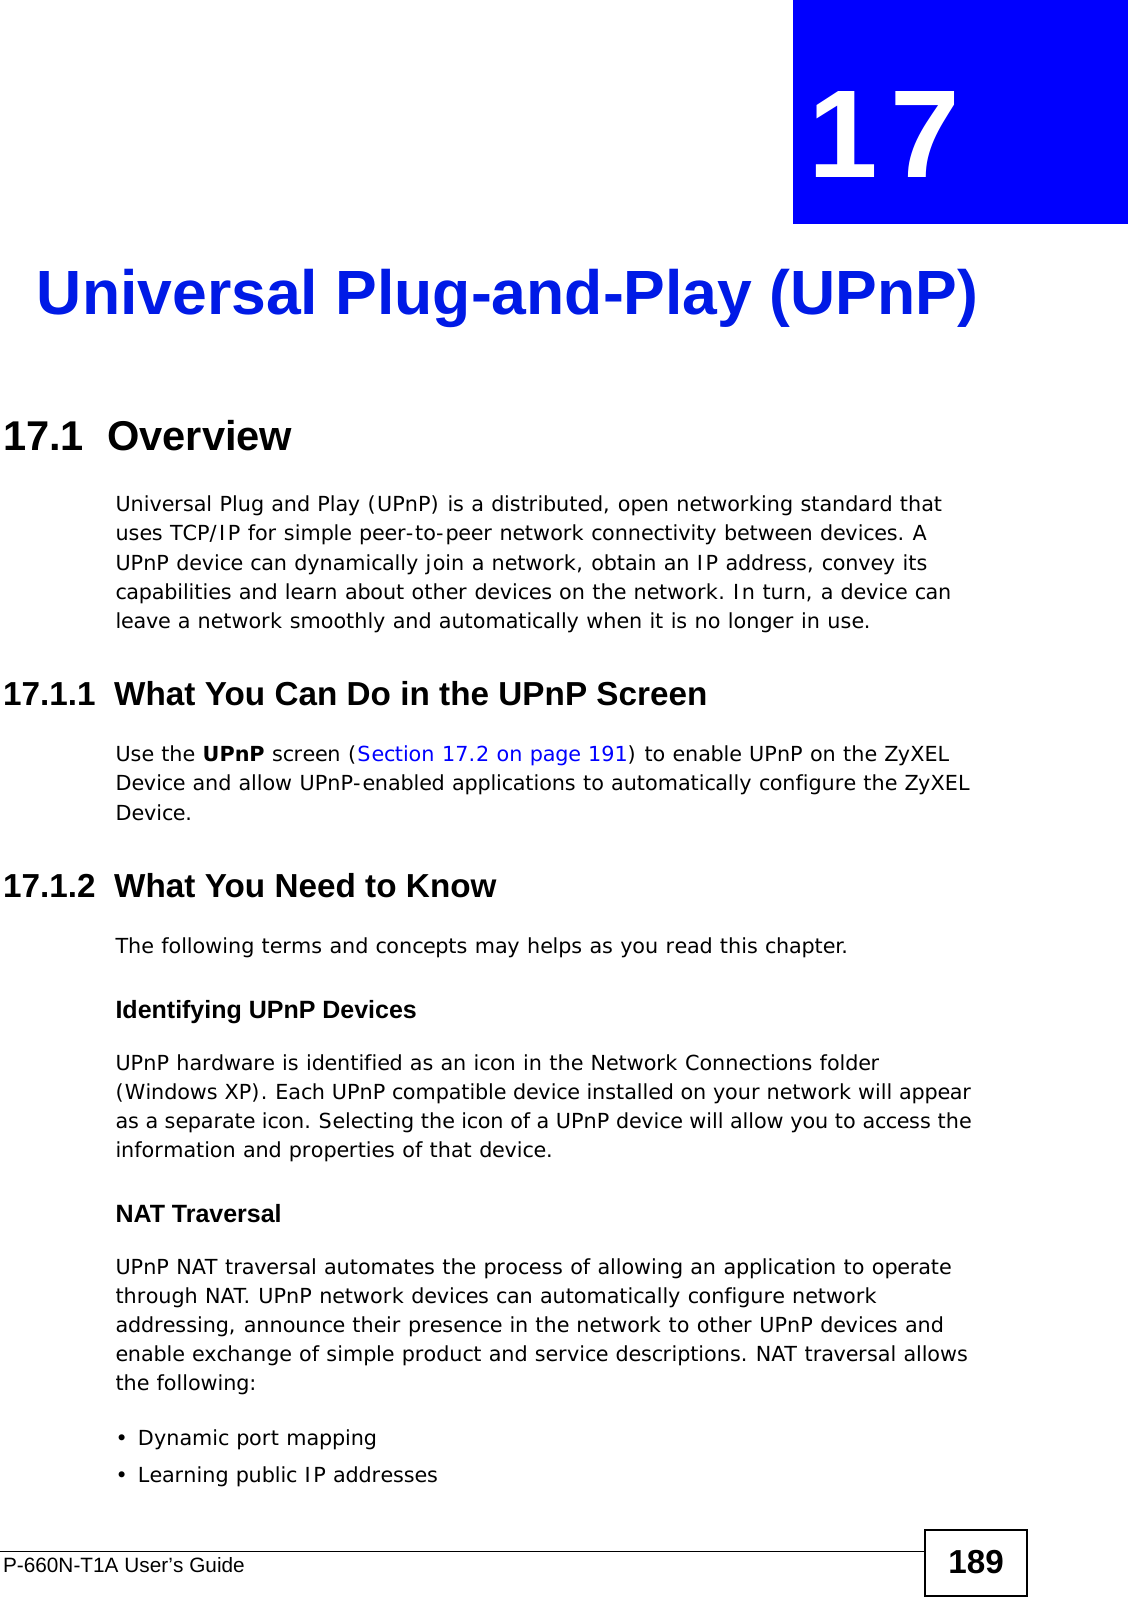 P-660N-T1A User’s Guide 189CHAPTER  17 Universal Plug-and-Play (UPnP)17.1  OverviewUniversal Plug and Play (UPnP) is a distributed, open networking standard that uses TCP/IP for simple peer-to-peer network connectivity between devices. A UPnP device can dynamically join a network, obtain an IP address, convey its capabilities and learn about other devices on the network. In turn, a device can leave a network smoothly and automatically when it is no longer in use.17.1.1  What You Can Do in the UPnP ScreenUse the UPnP screen (Section 17.2 on page 191) to enable UPnP on the ZyXEL Device and allow UPnP-enabled applications to automatically configure the ZyXEL Device.17.1.2  What You Need to KnowThe following terms and concepts may helps as you read this chapter.Identifying UPnP DevicesUPnP hardware is identified as an icon in the Network Connections folder (Windows XP). Each UPnP compatible device installed on your network will appear as a separate icon. Selecting the icon of a UPnP device will allow you to access the information and properties of that device. NAT TraversalUPnP NAT traversal automates the process of allowing an application to operate through NAT. UPnP network devices can automatically configure network addressing, announce their presence in the network to other UPnP devices and enable exchange of simple product and service descriptions. NAT traversal allows the following:• Dynamic port mapping• Learning public IP addresses